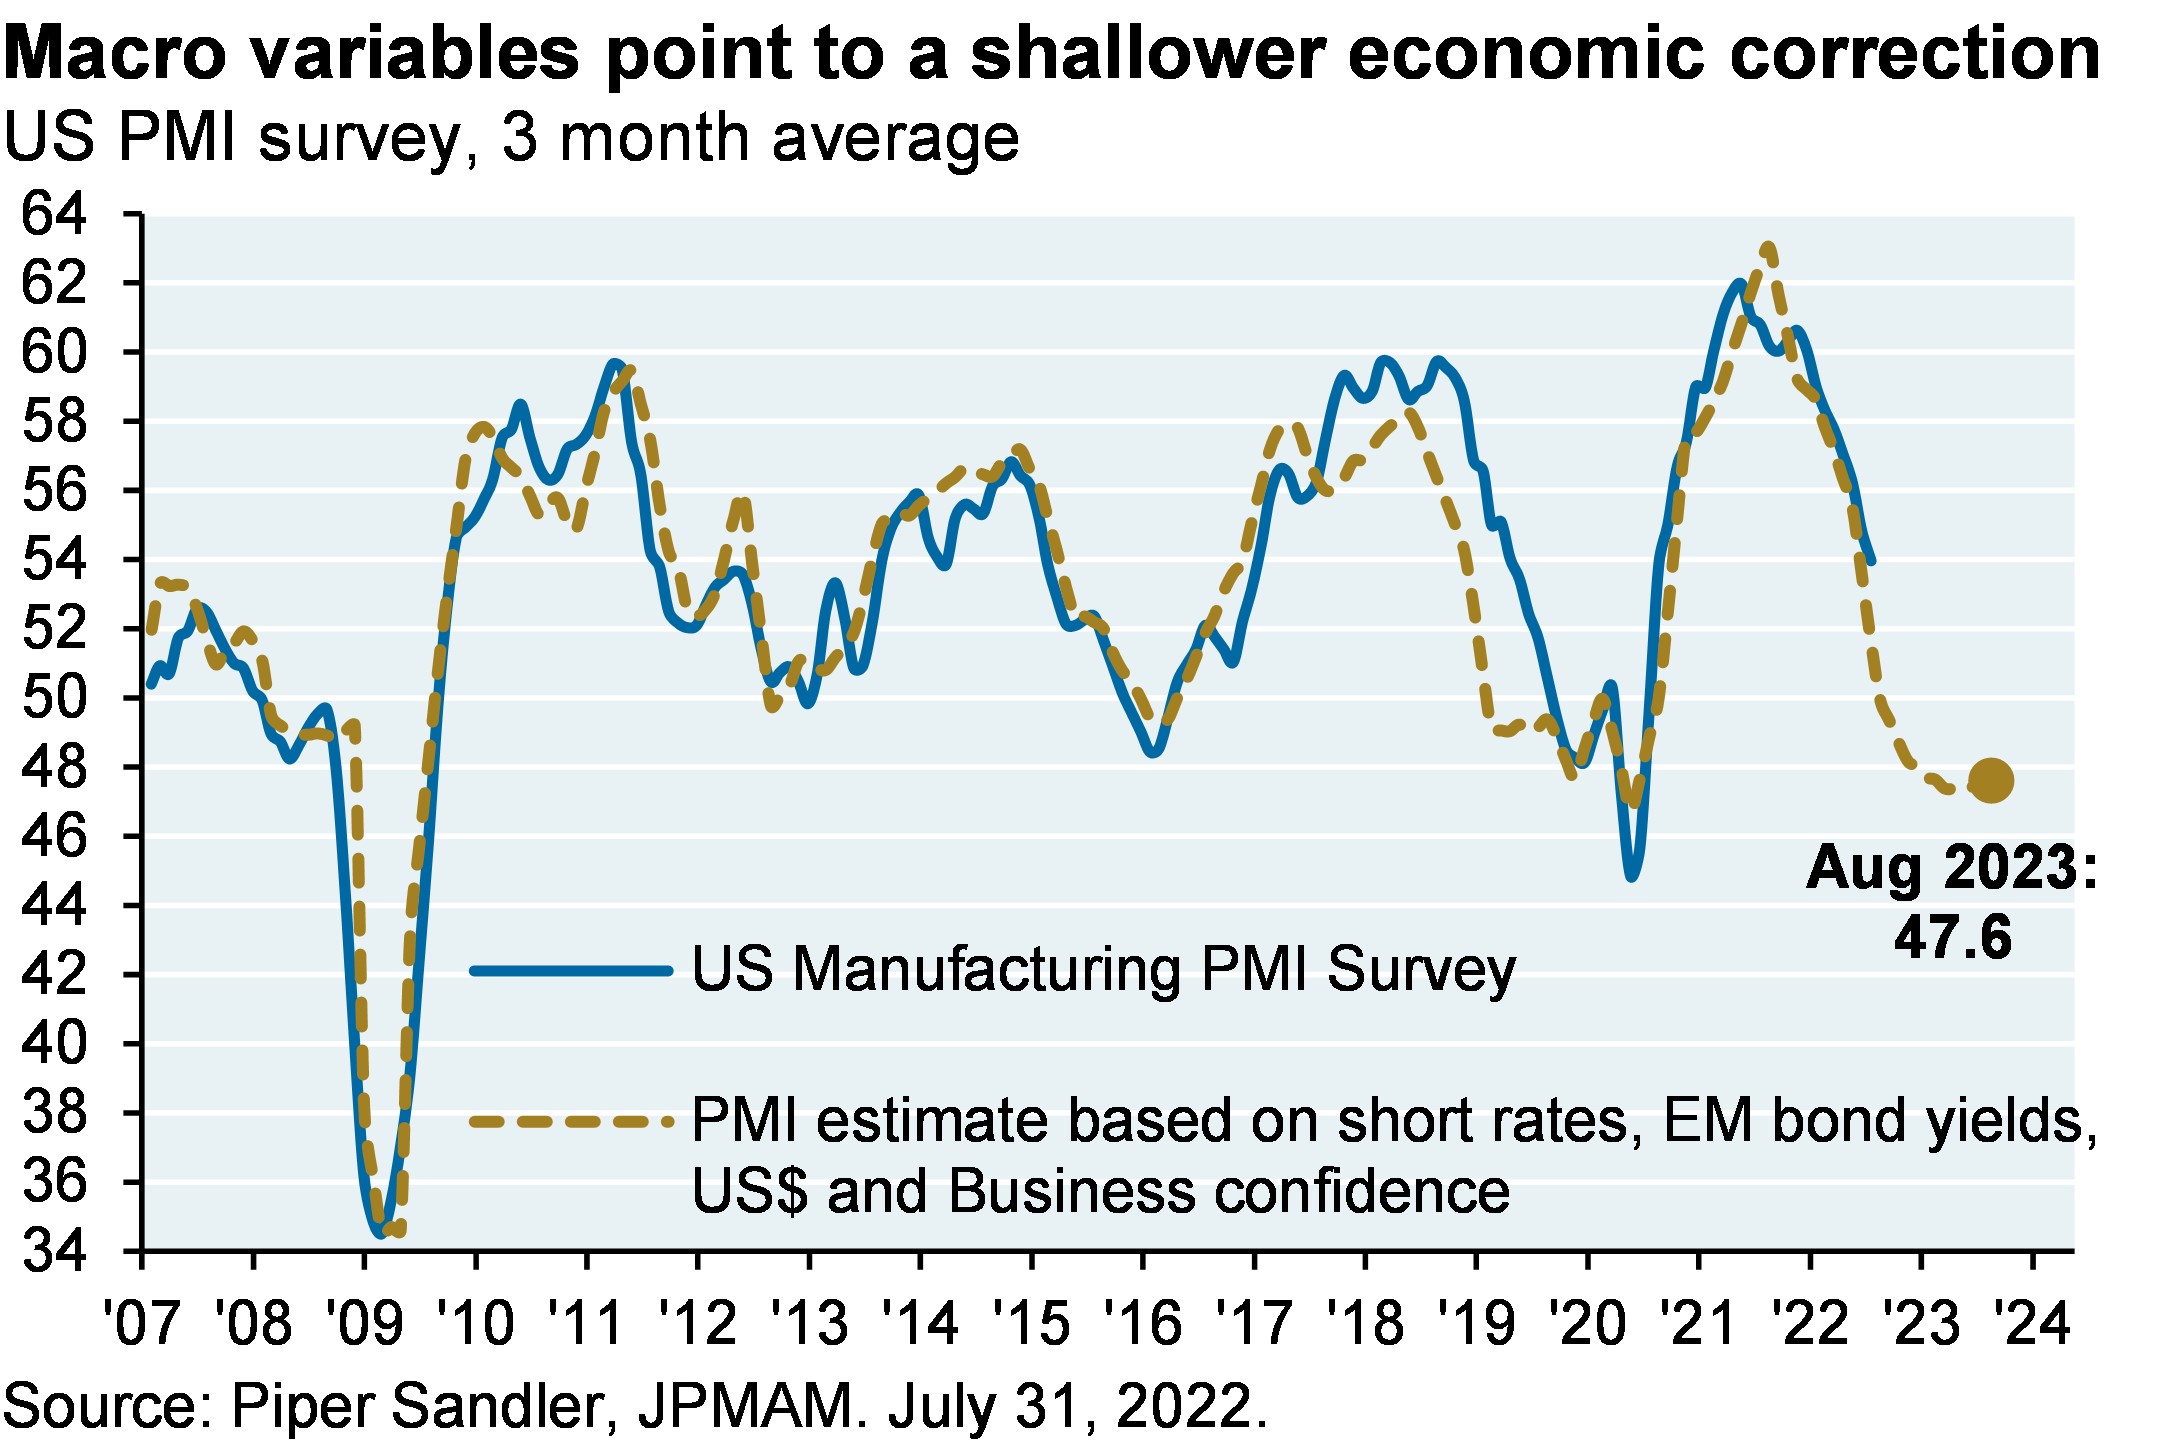 Macro variables point to a shallower economic correction